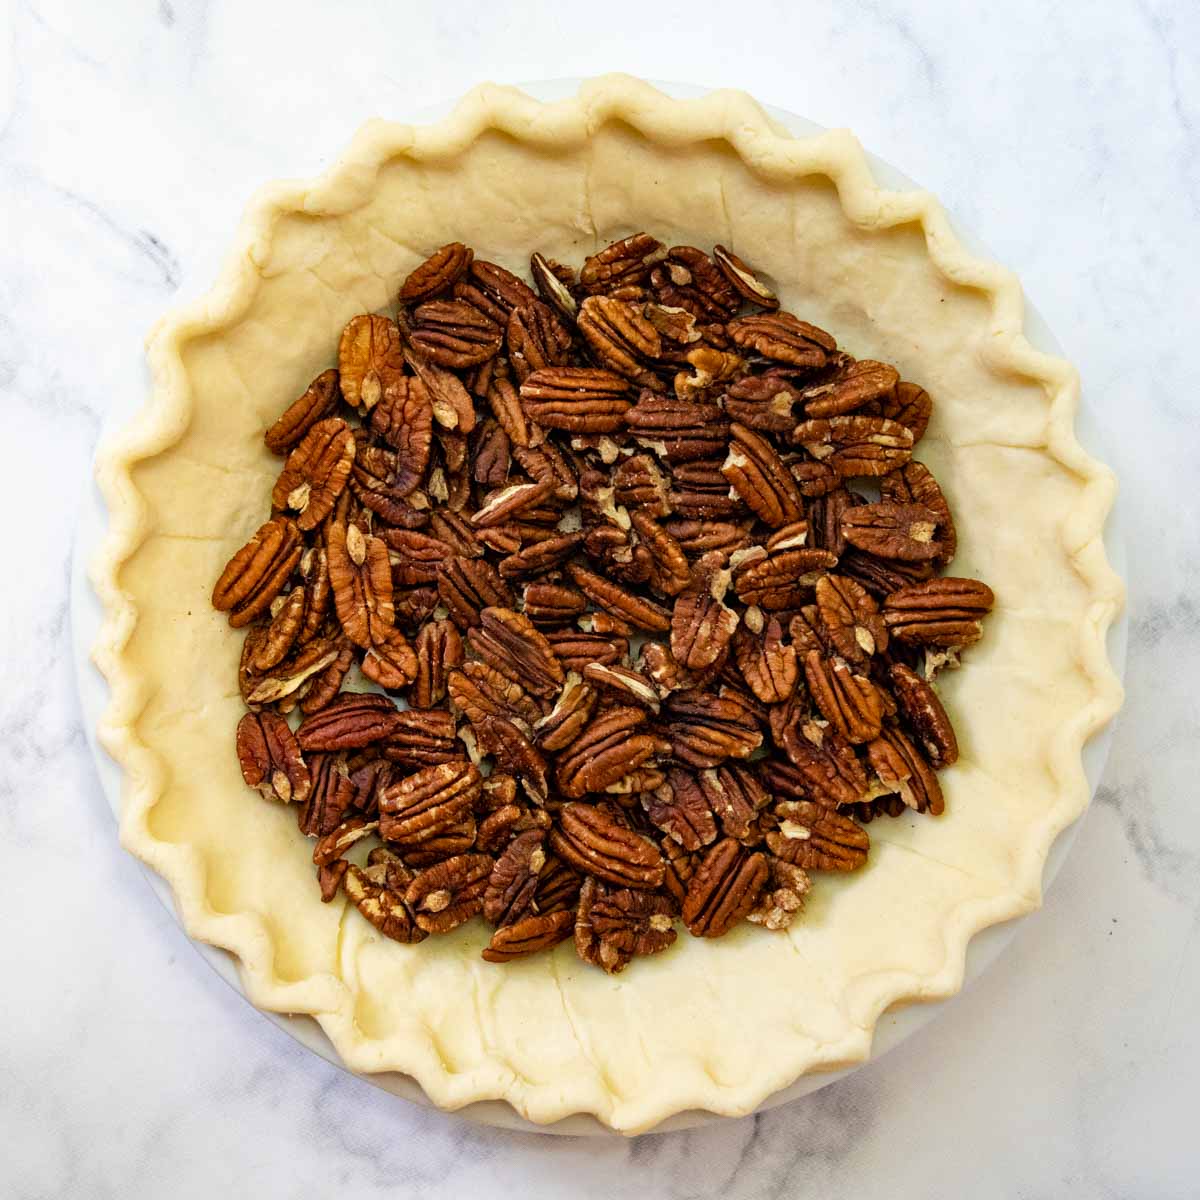 the pecans on the bottom of an unbaked pie crust.